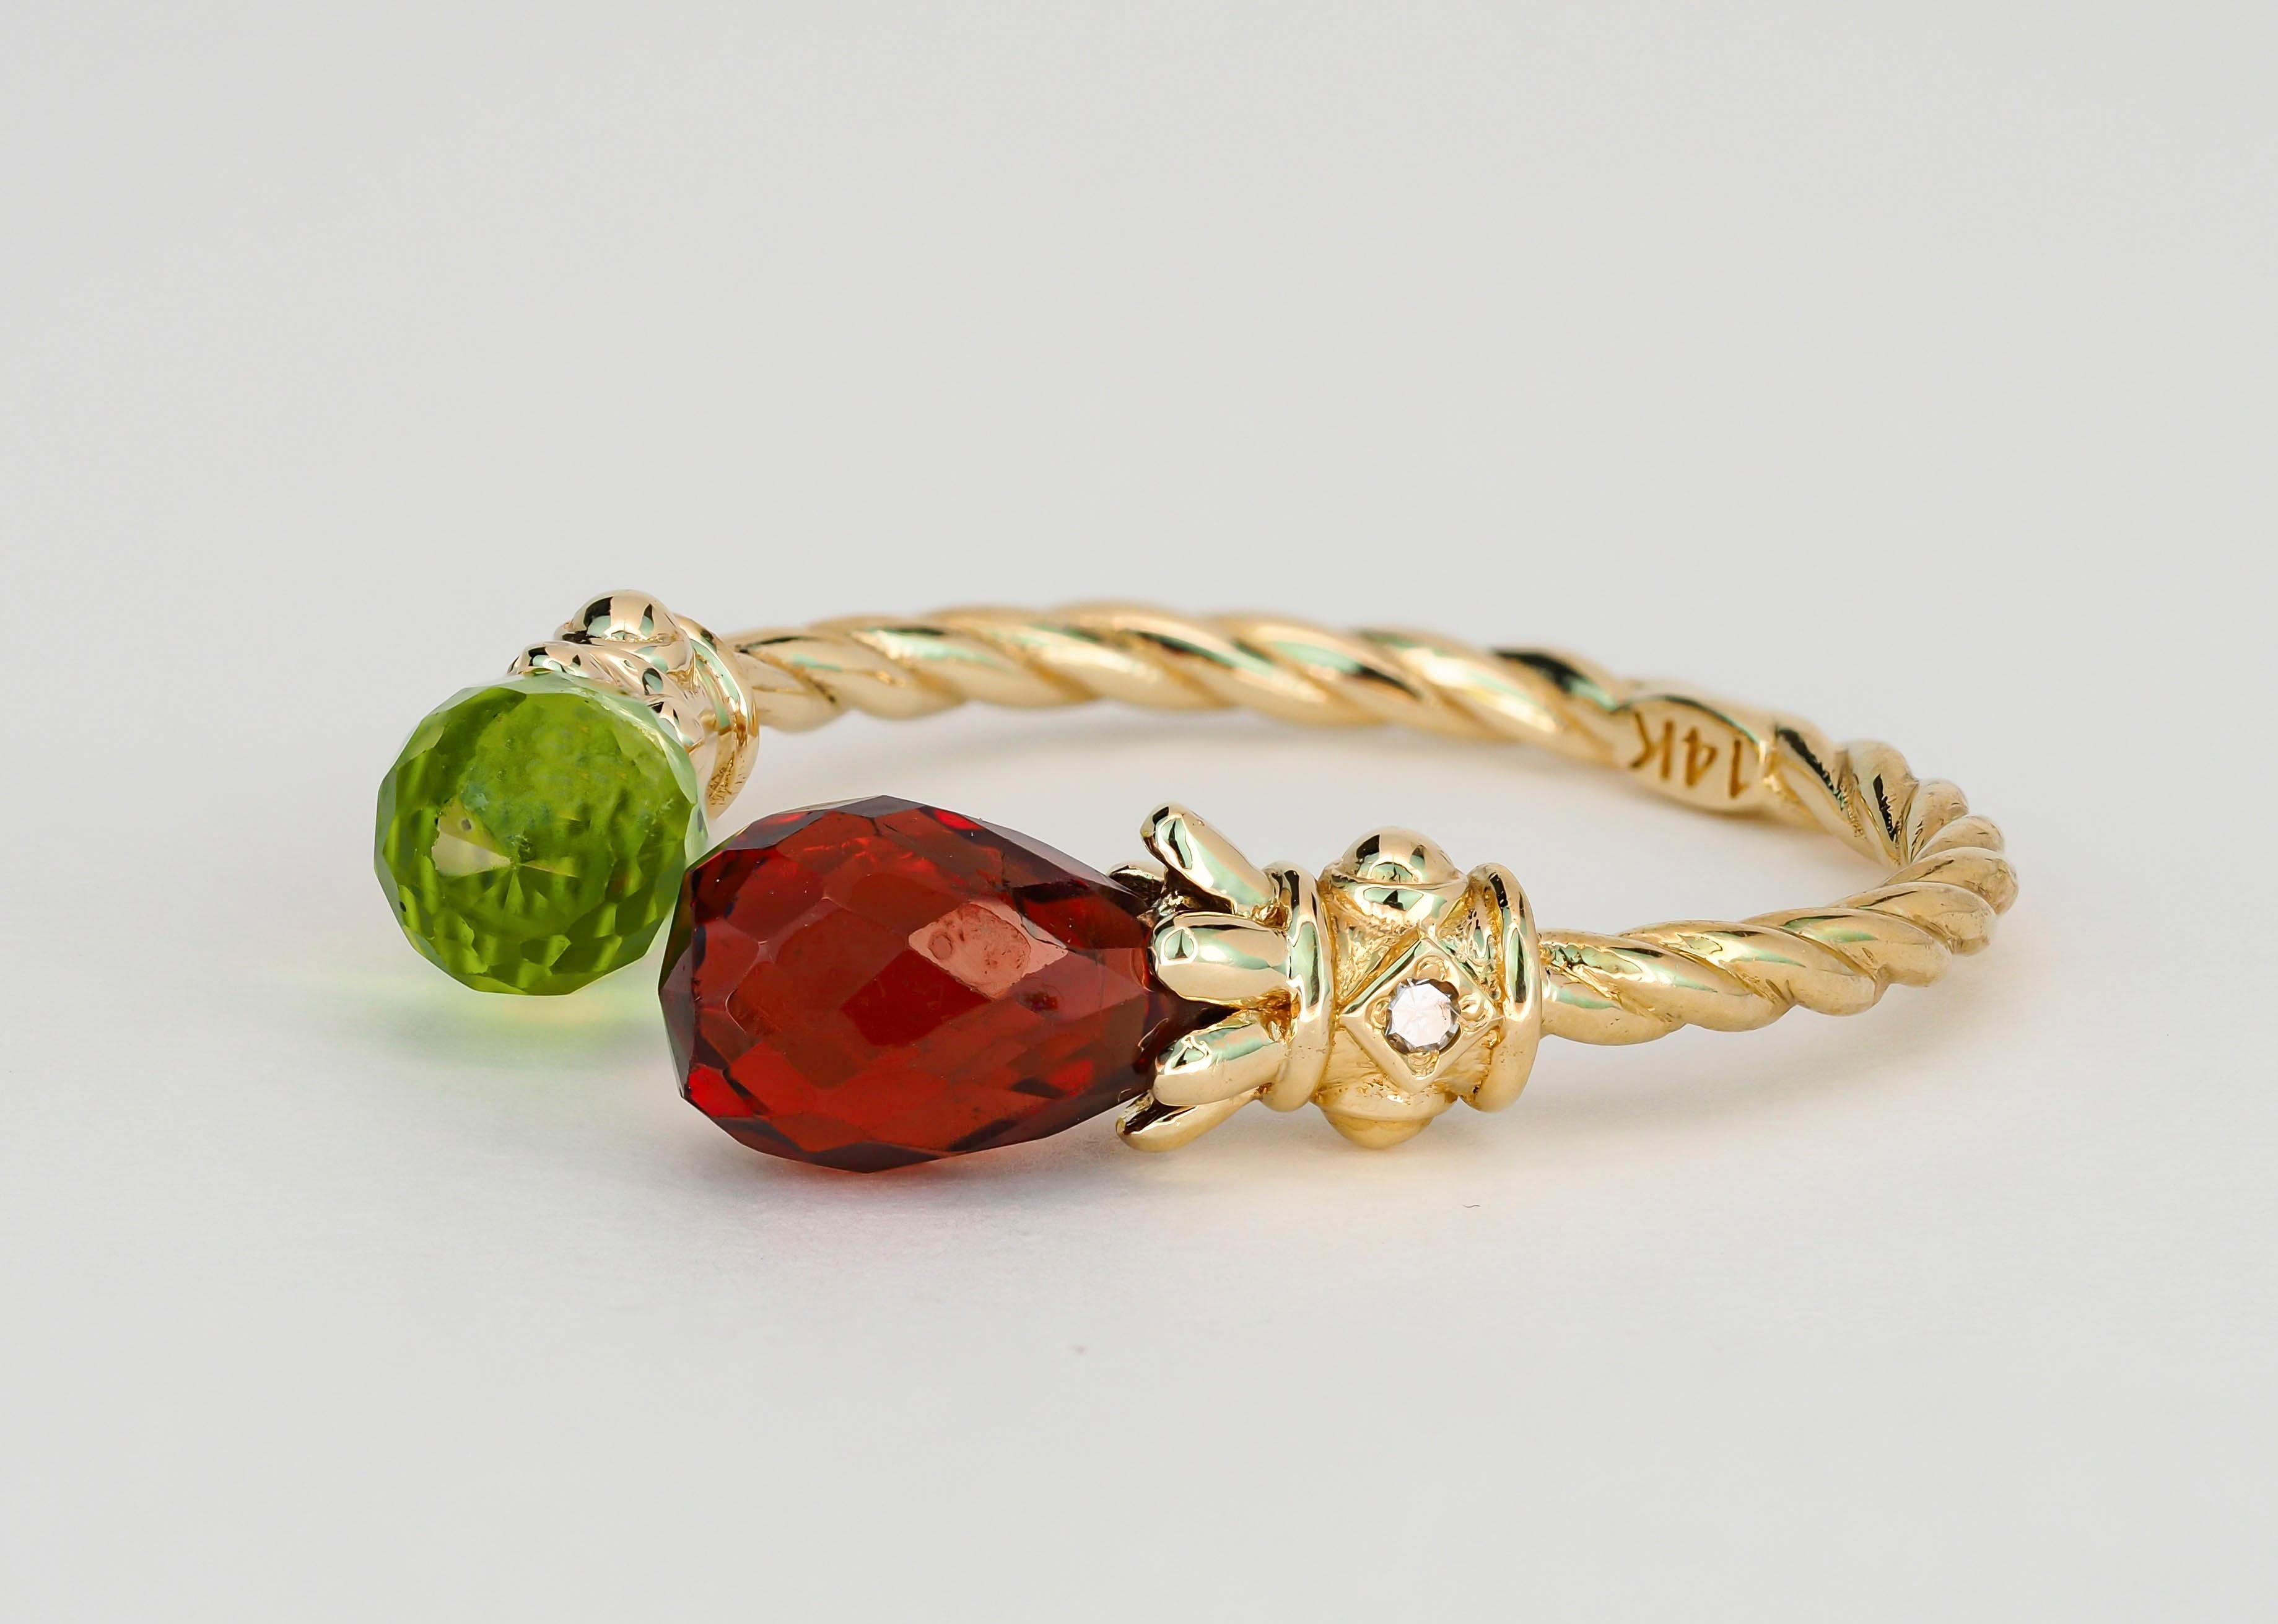 For Sale:   Open ended gold ring with peridot, garnet and diamonds 11